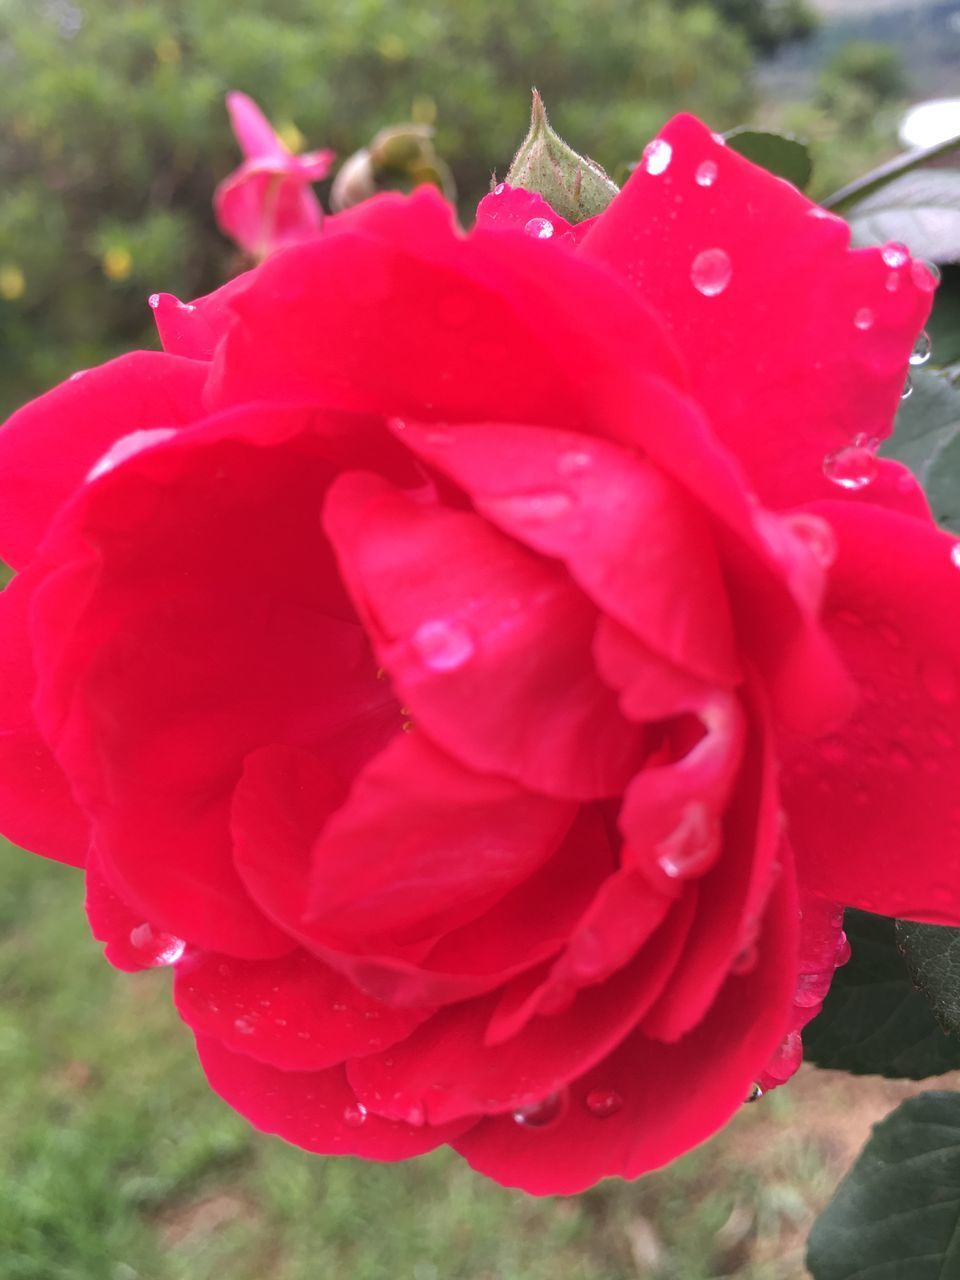 CLOSE UP OF RED ROSE FLOWER